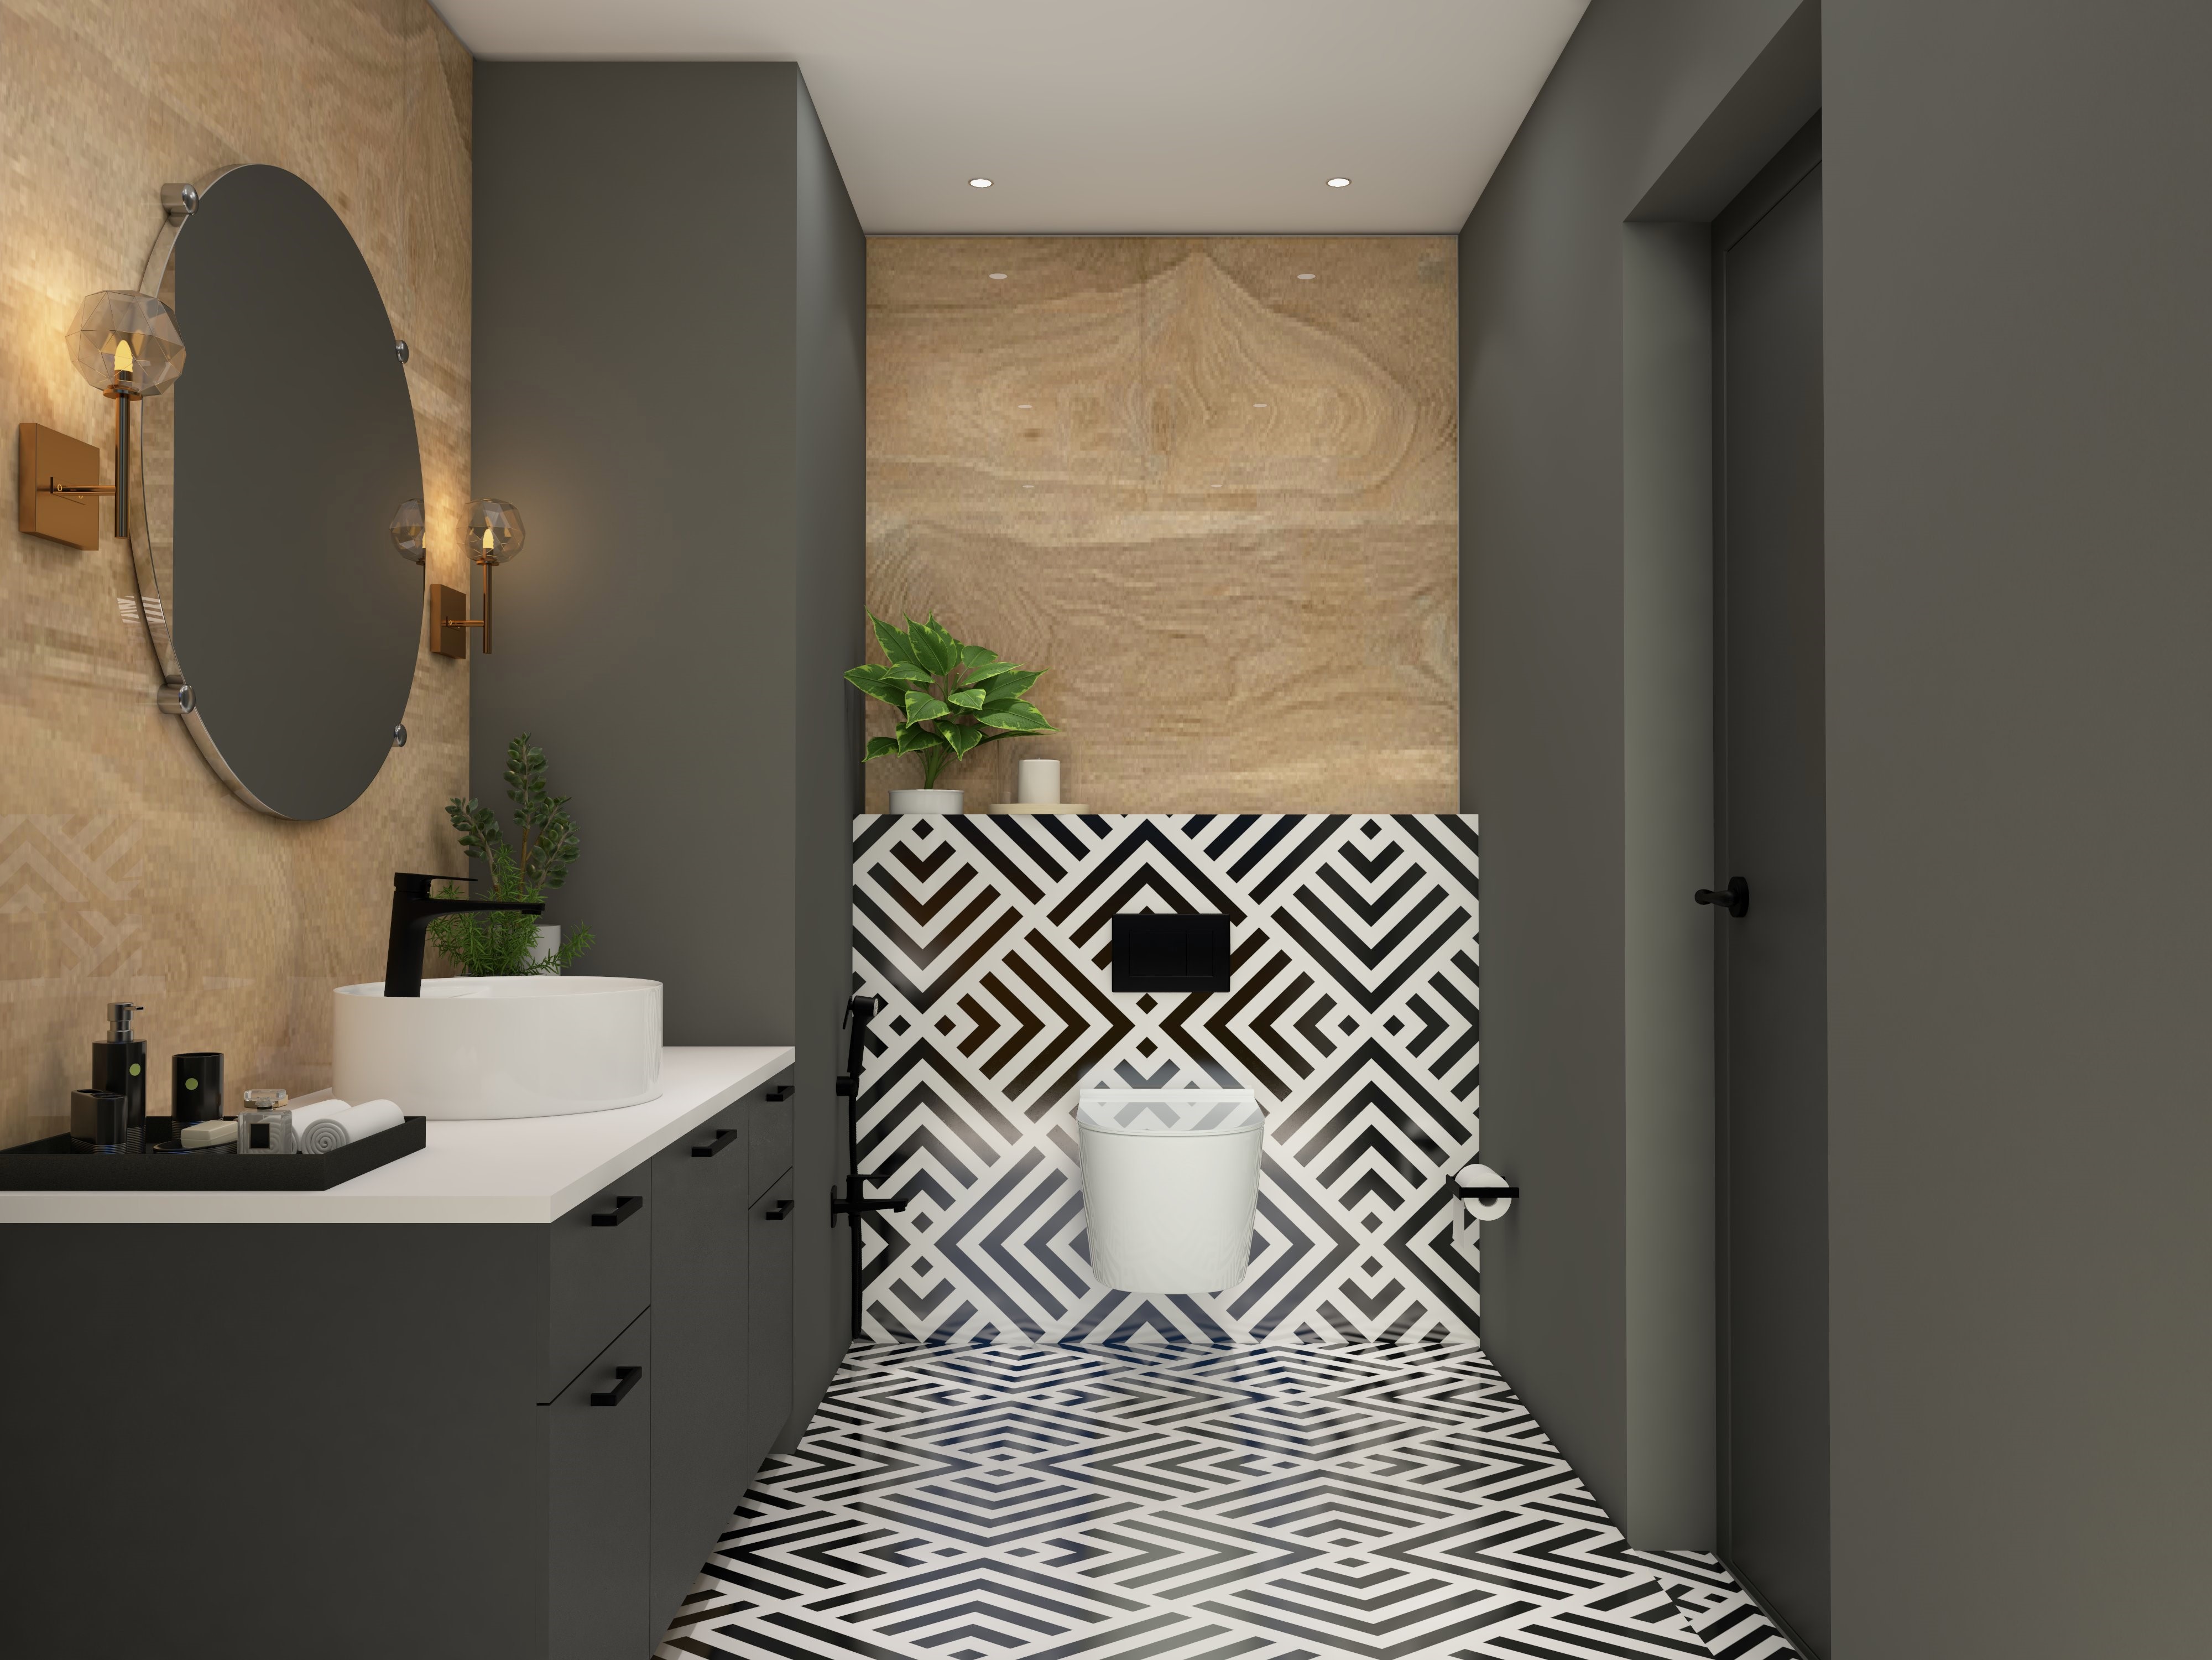 Grey and beige bathroom with white and black patterned tiles